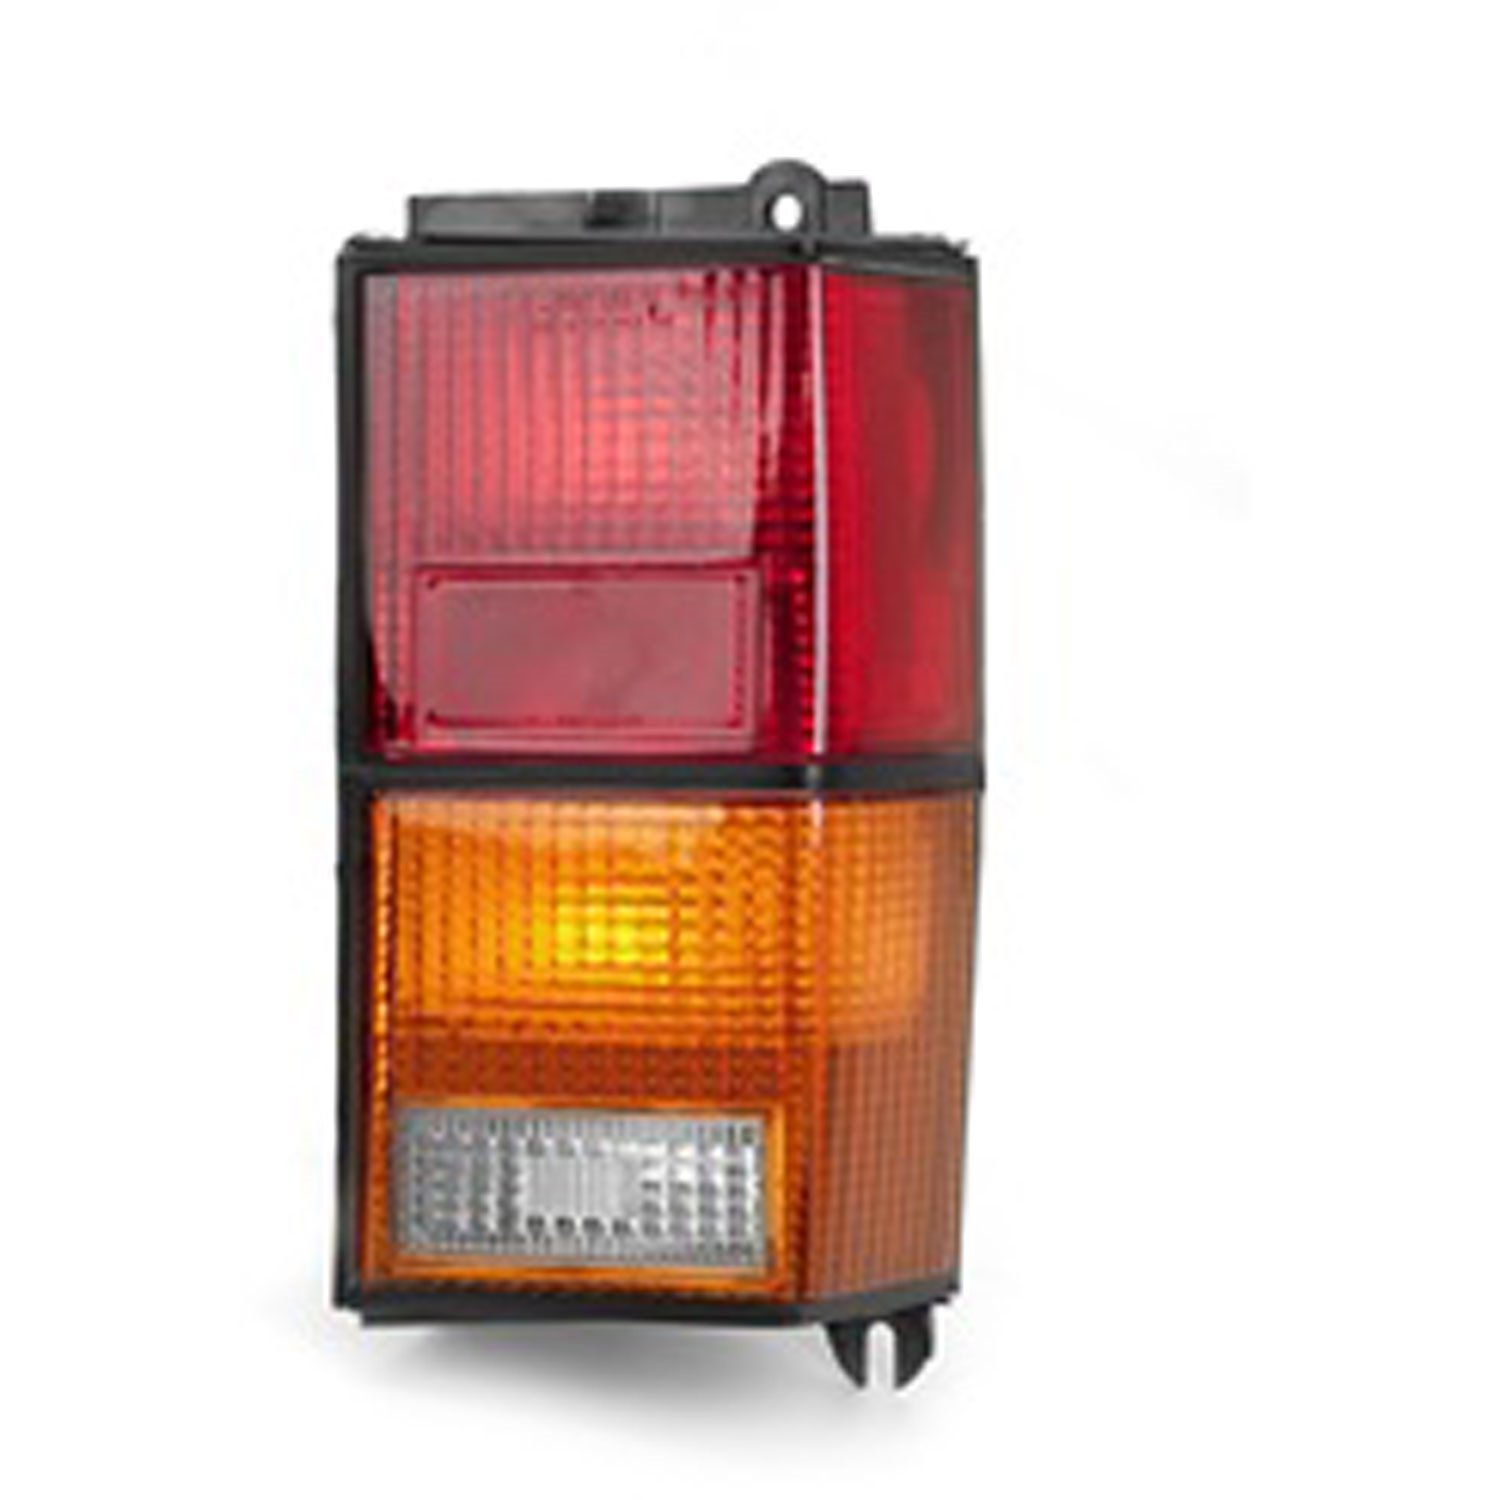 Replacement tail light assembly from Omix-ADA, Fits right side of 84-96 Jeep Cherokee XJ